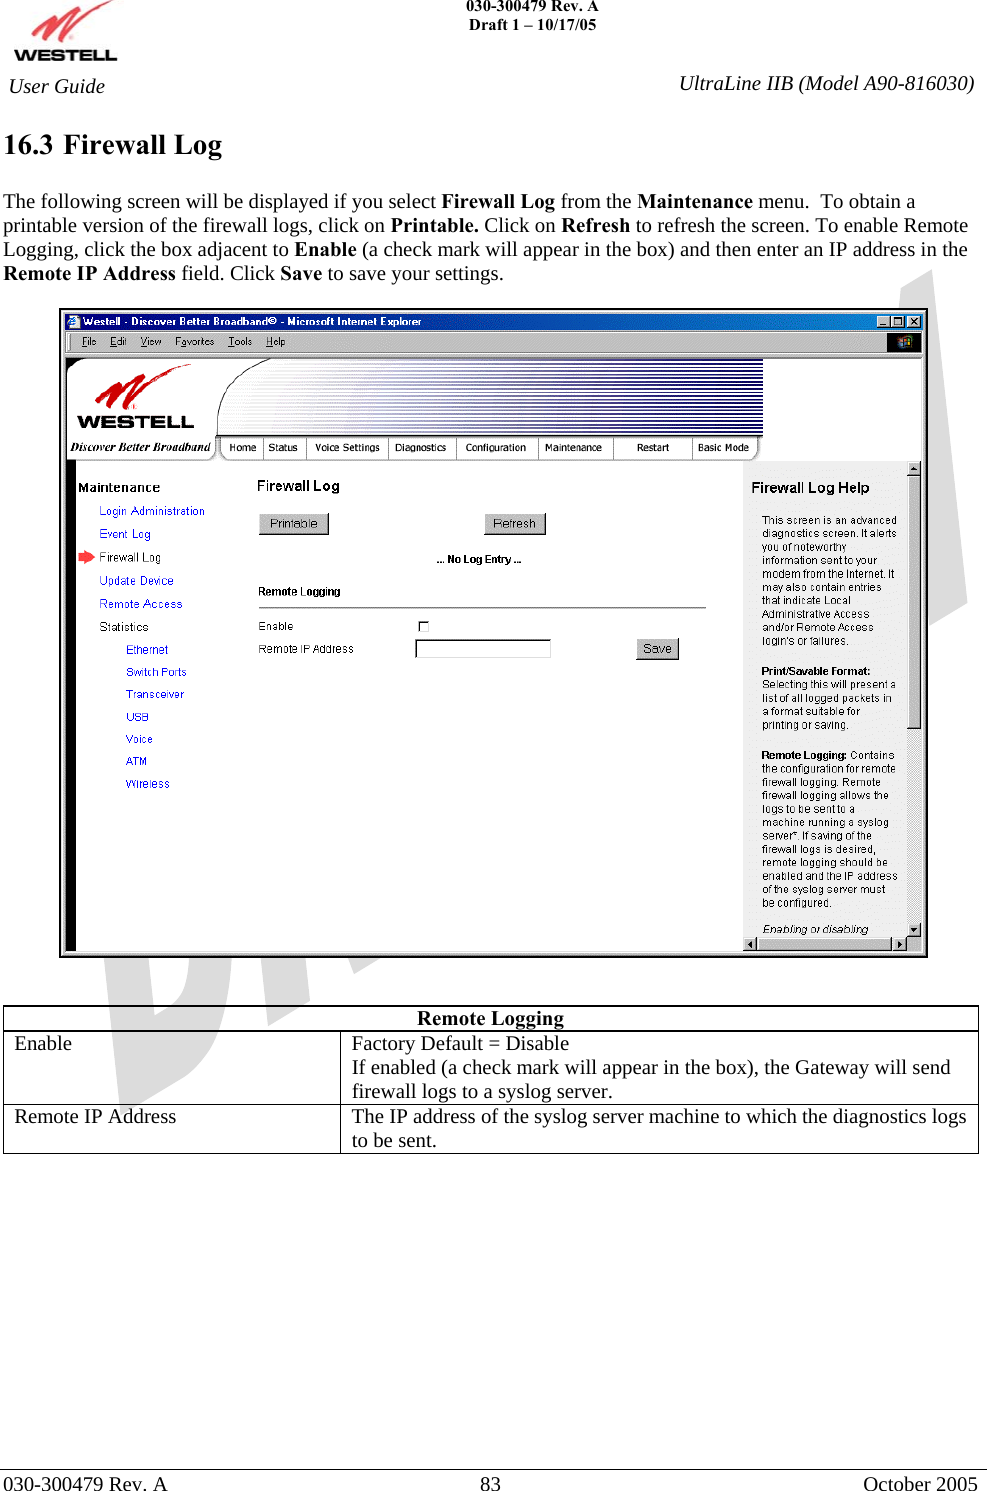    030-300479 Rev. A Draft 1 – 10/17/05   030-300479 Rev. A  83  October 2005  User Guide  UltraLine IIB (Model A90-816030)16.3 Firewall Log  The following screen will be displayed if you select Firewall Log from the Maintenance menu.  To obtain a printable version of the firewall logs, click on Printable. Click on Refresh to refresh the screen. To enable Remote Logging, click the box adjacent to Enable (a check mark will appear in the box) and then enter an IP address in the Remote IP Address field. Click Save to save your settings.     Remote Logging Enable  Factory Default = Disable If enabled (a check mark will appear in the box), the Gateway will send firewall logs to a syslog server. Remote IP Address  The IP address of the syslog server machine to which the diagnostics logs to be sent.             